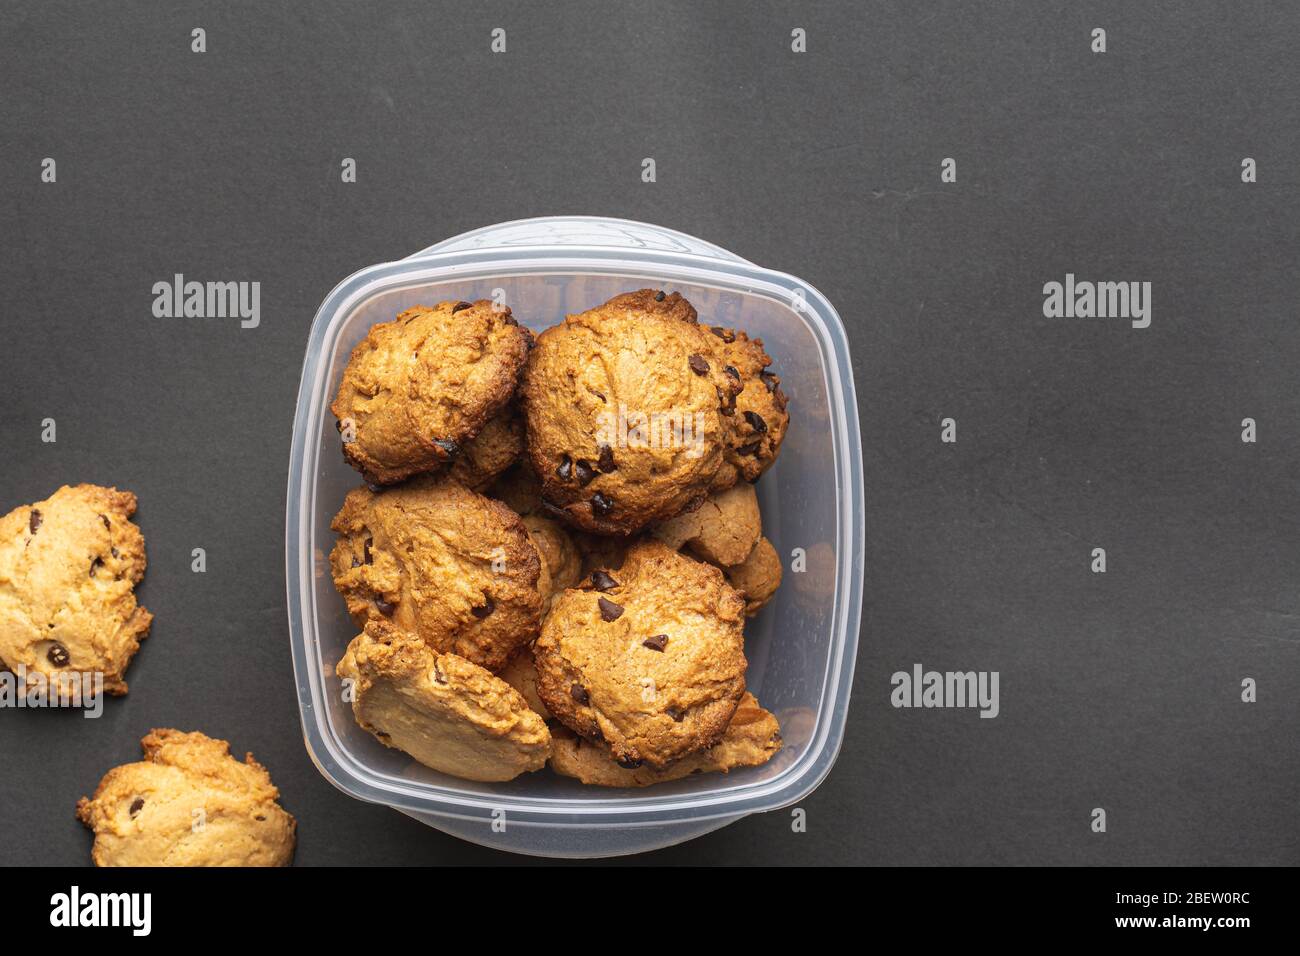 Homemade chocolate cookies on a plastic recipient on a dark grey background Stock Photo